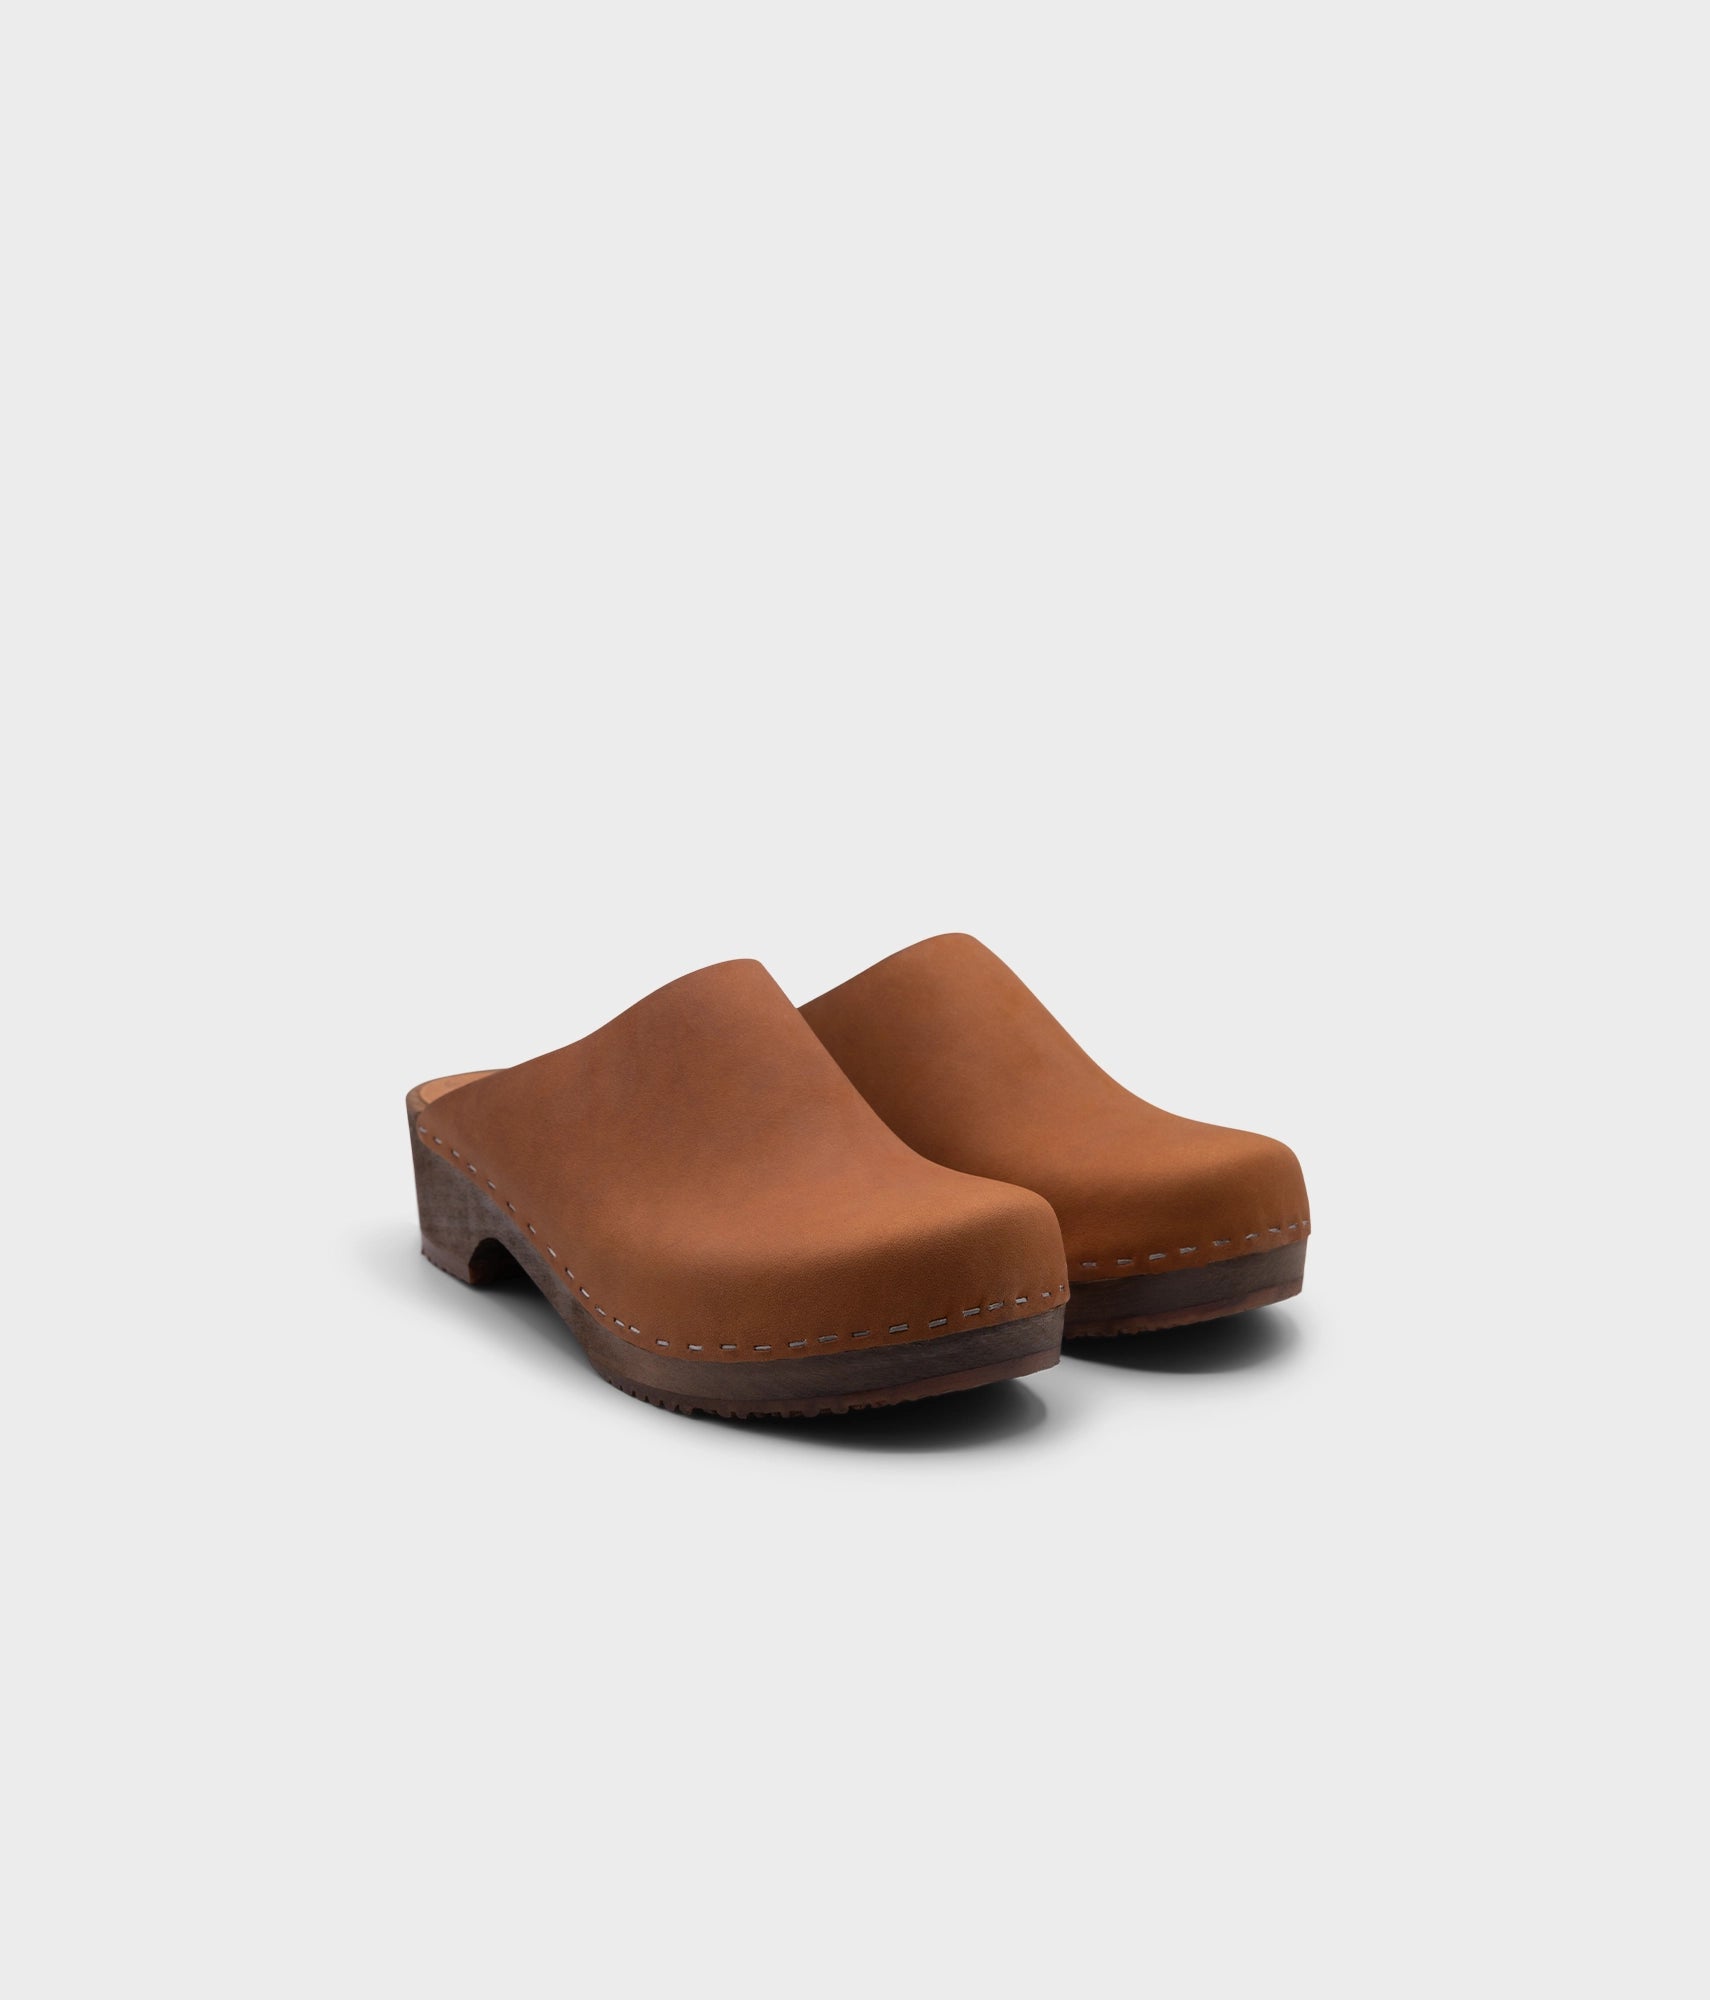 low heeled minimalistic clog mules in dexter tan nubuck leather stapled on a dark wooden base